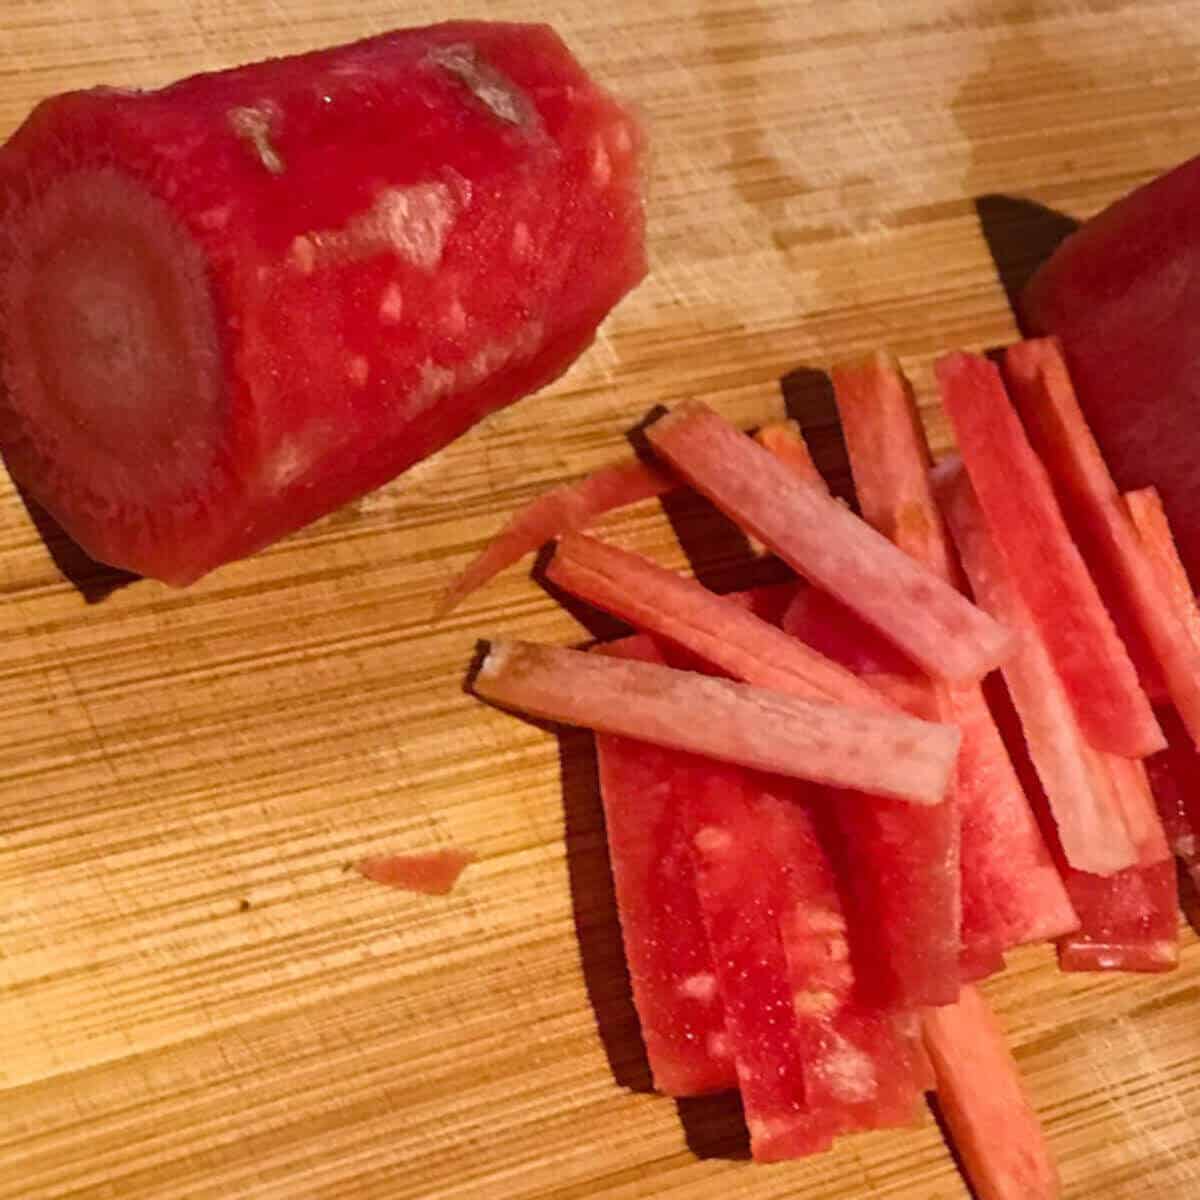 Red carrot cut into matchsticks and placed on a wooden board.